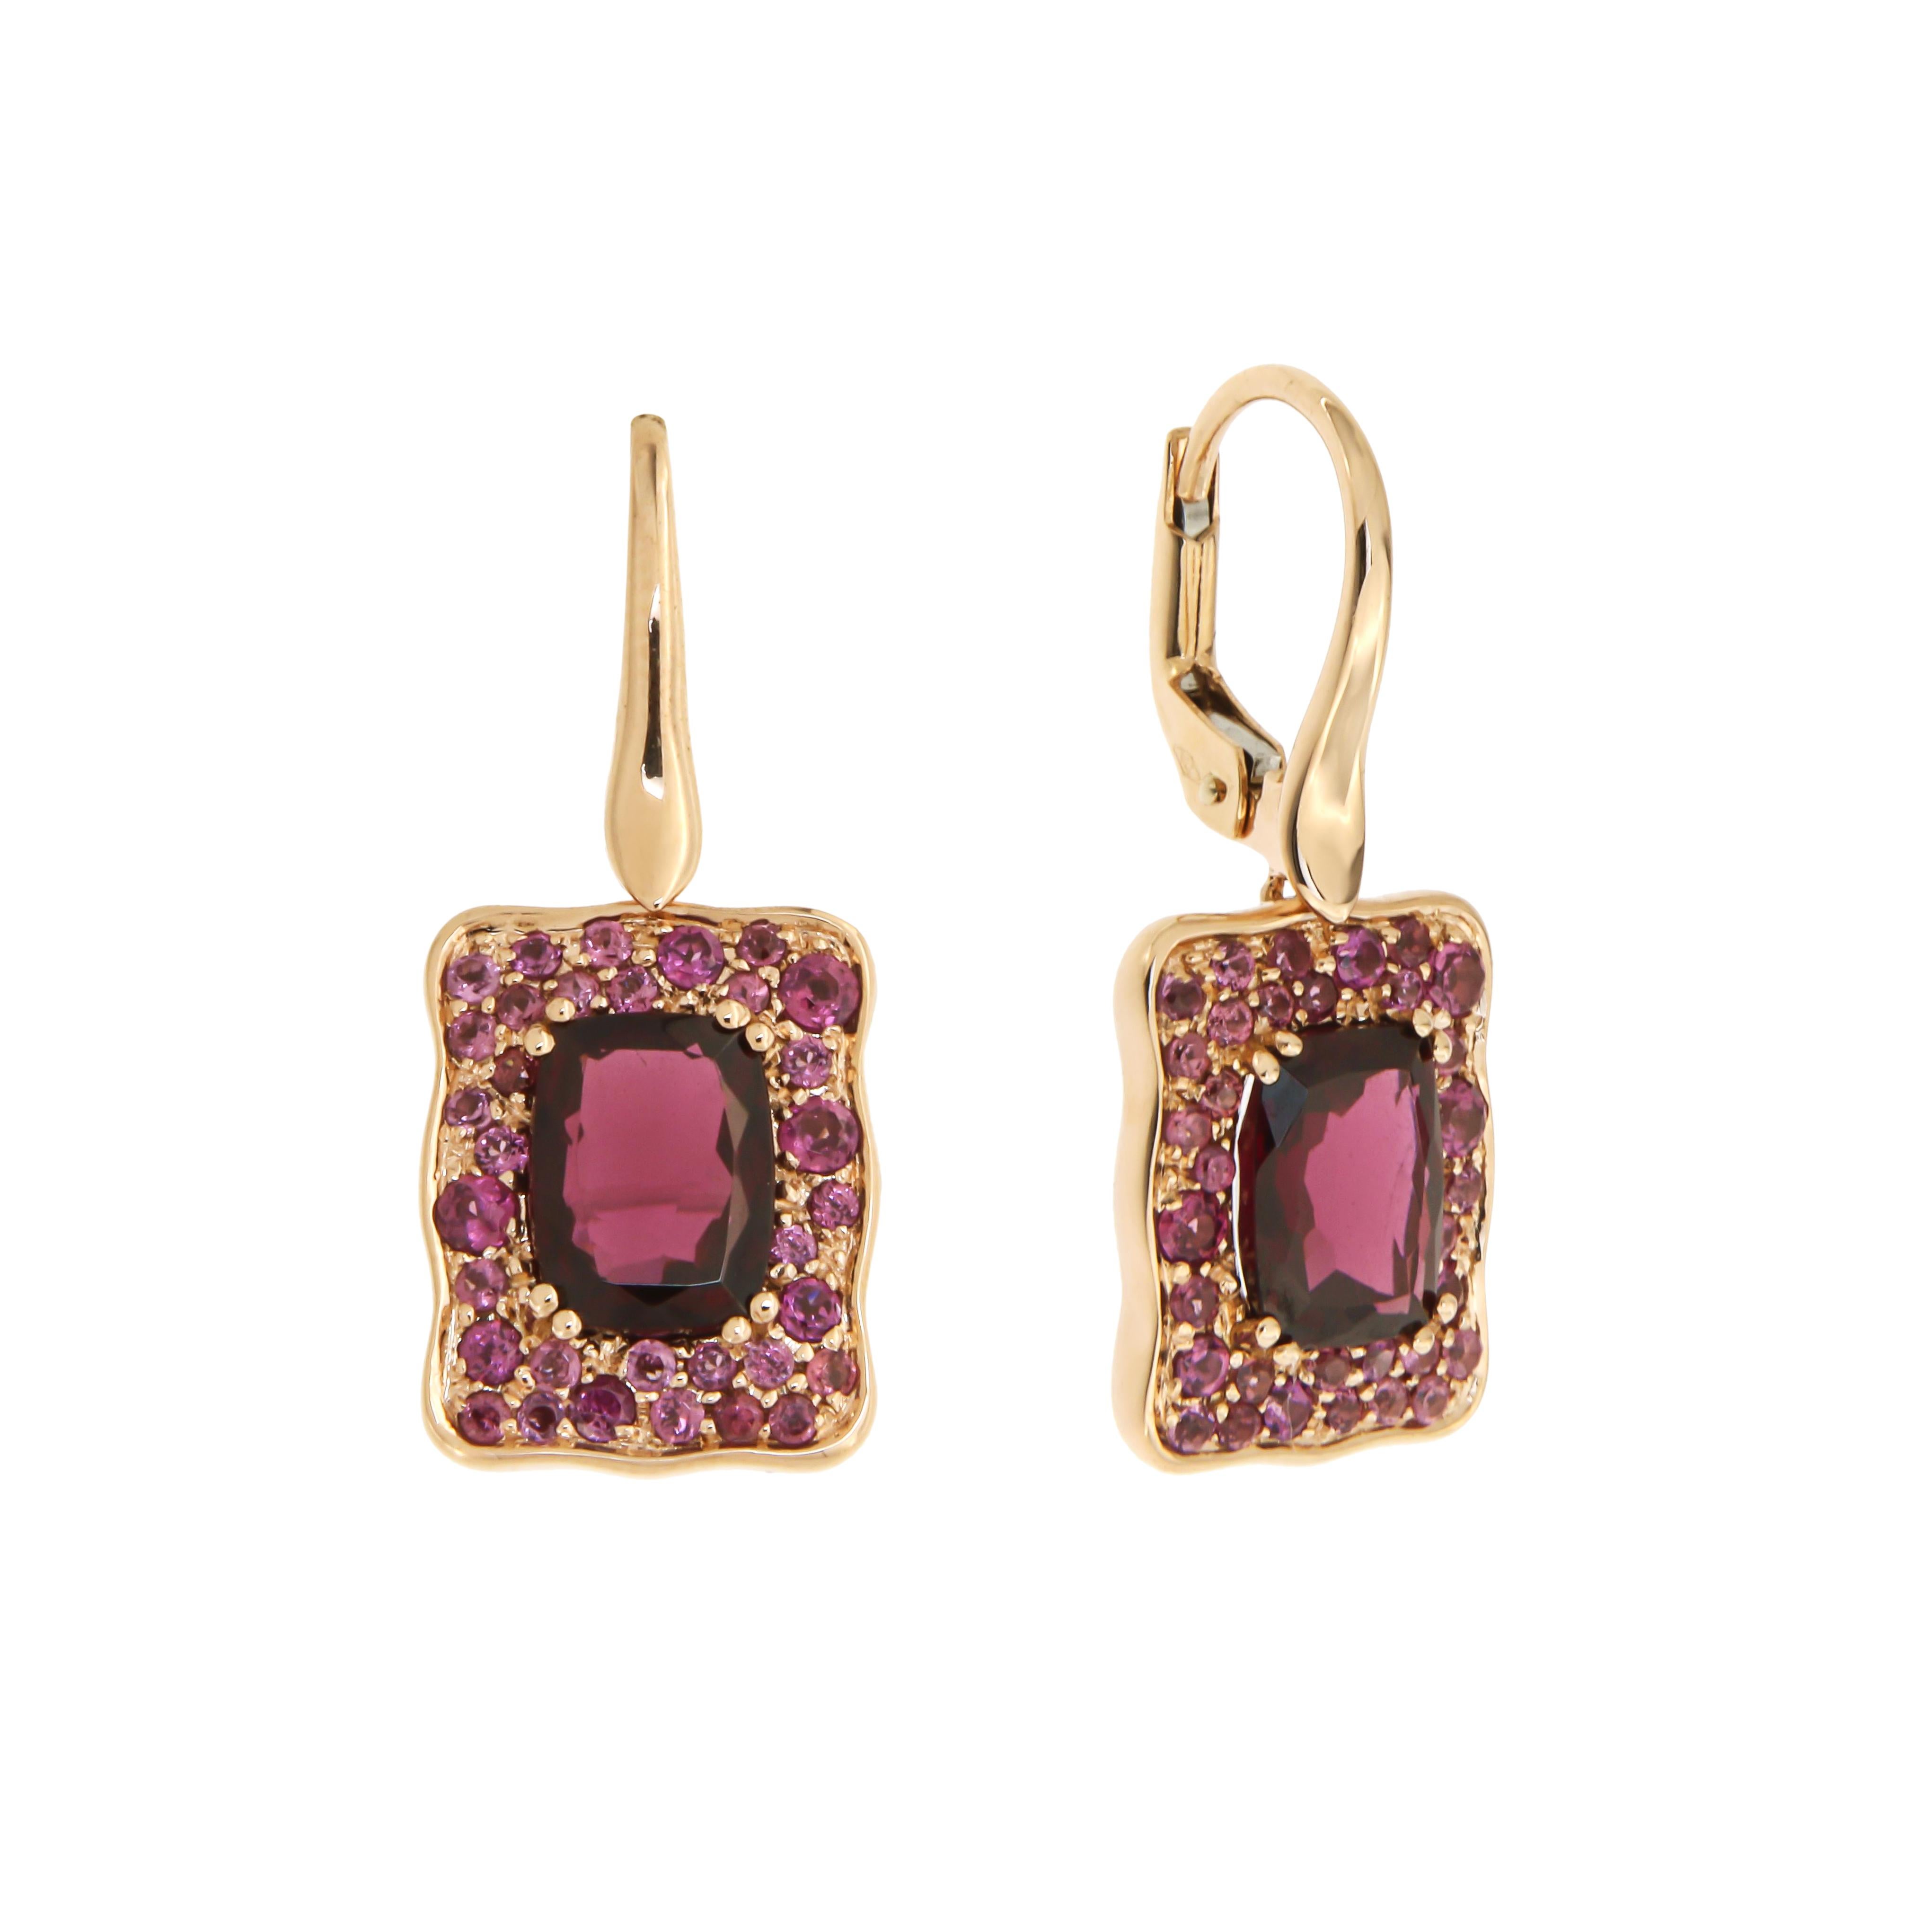 Stylish 18K Rhodolite Rose Gold Lever-Back Earrings for Her Made in Italy In New Condition For Sale In Montreux, CH